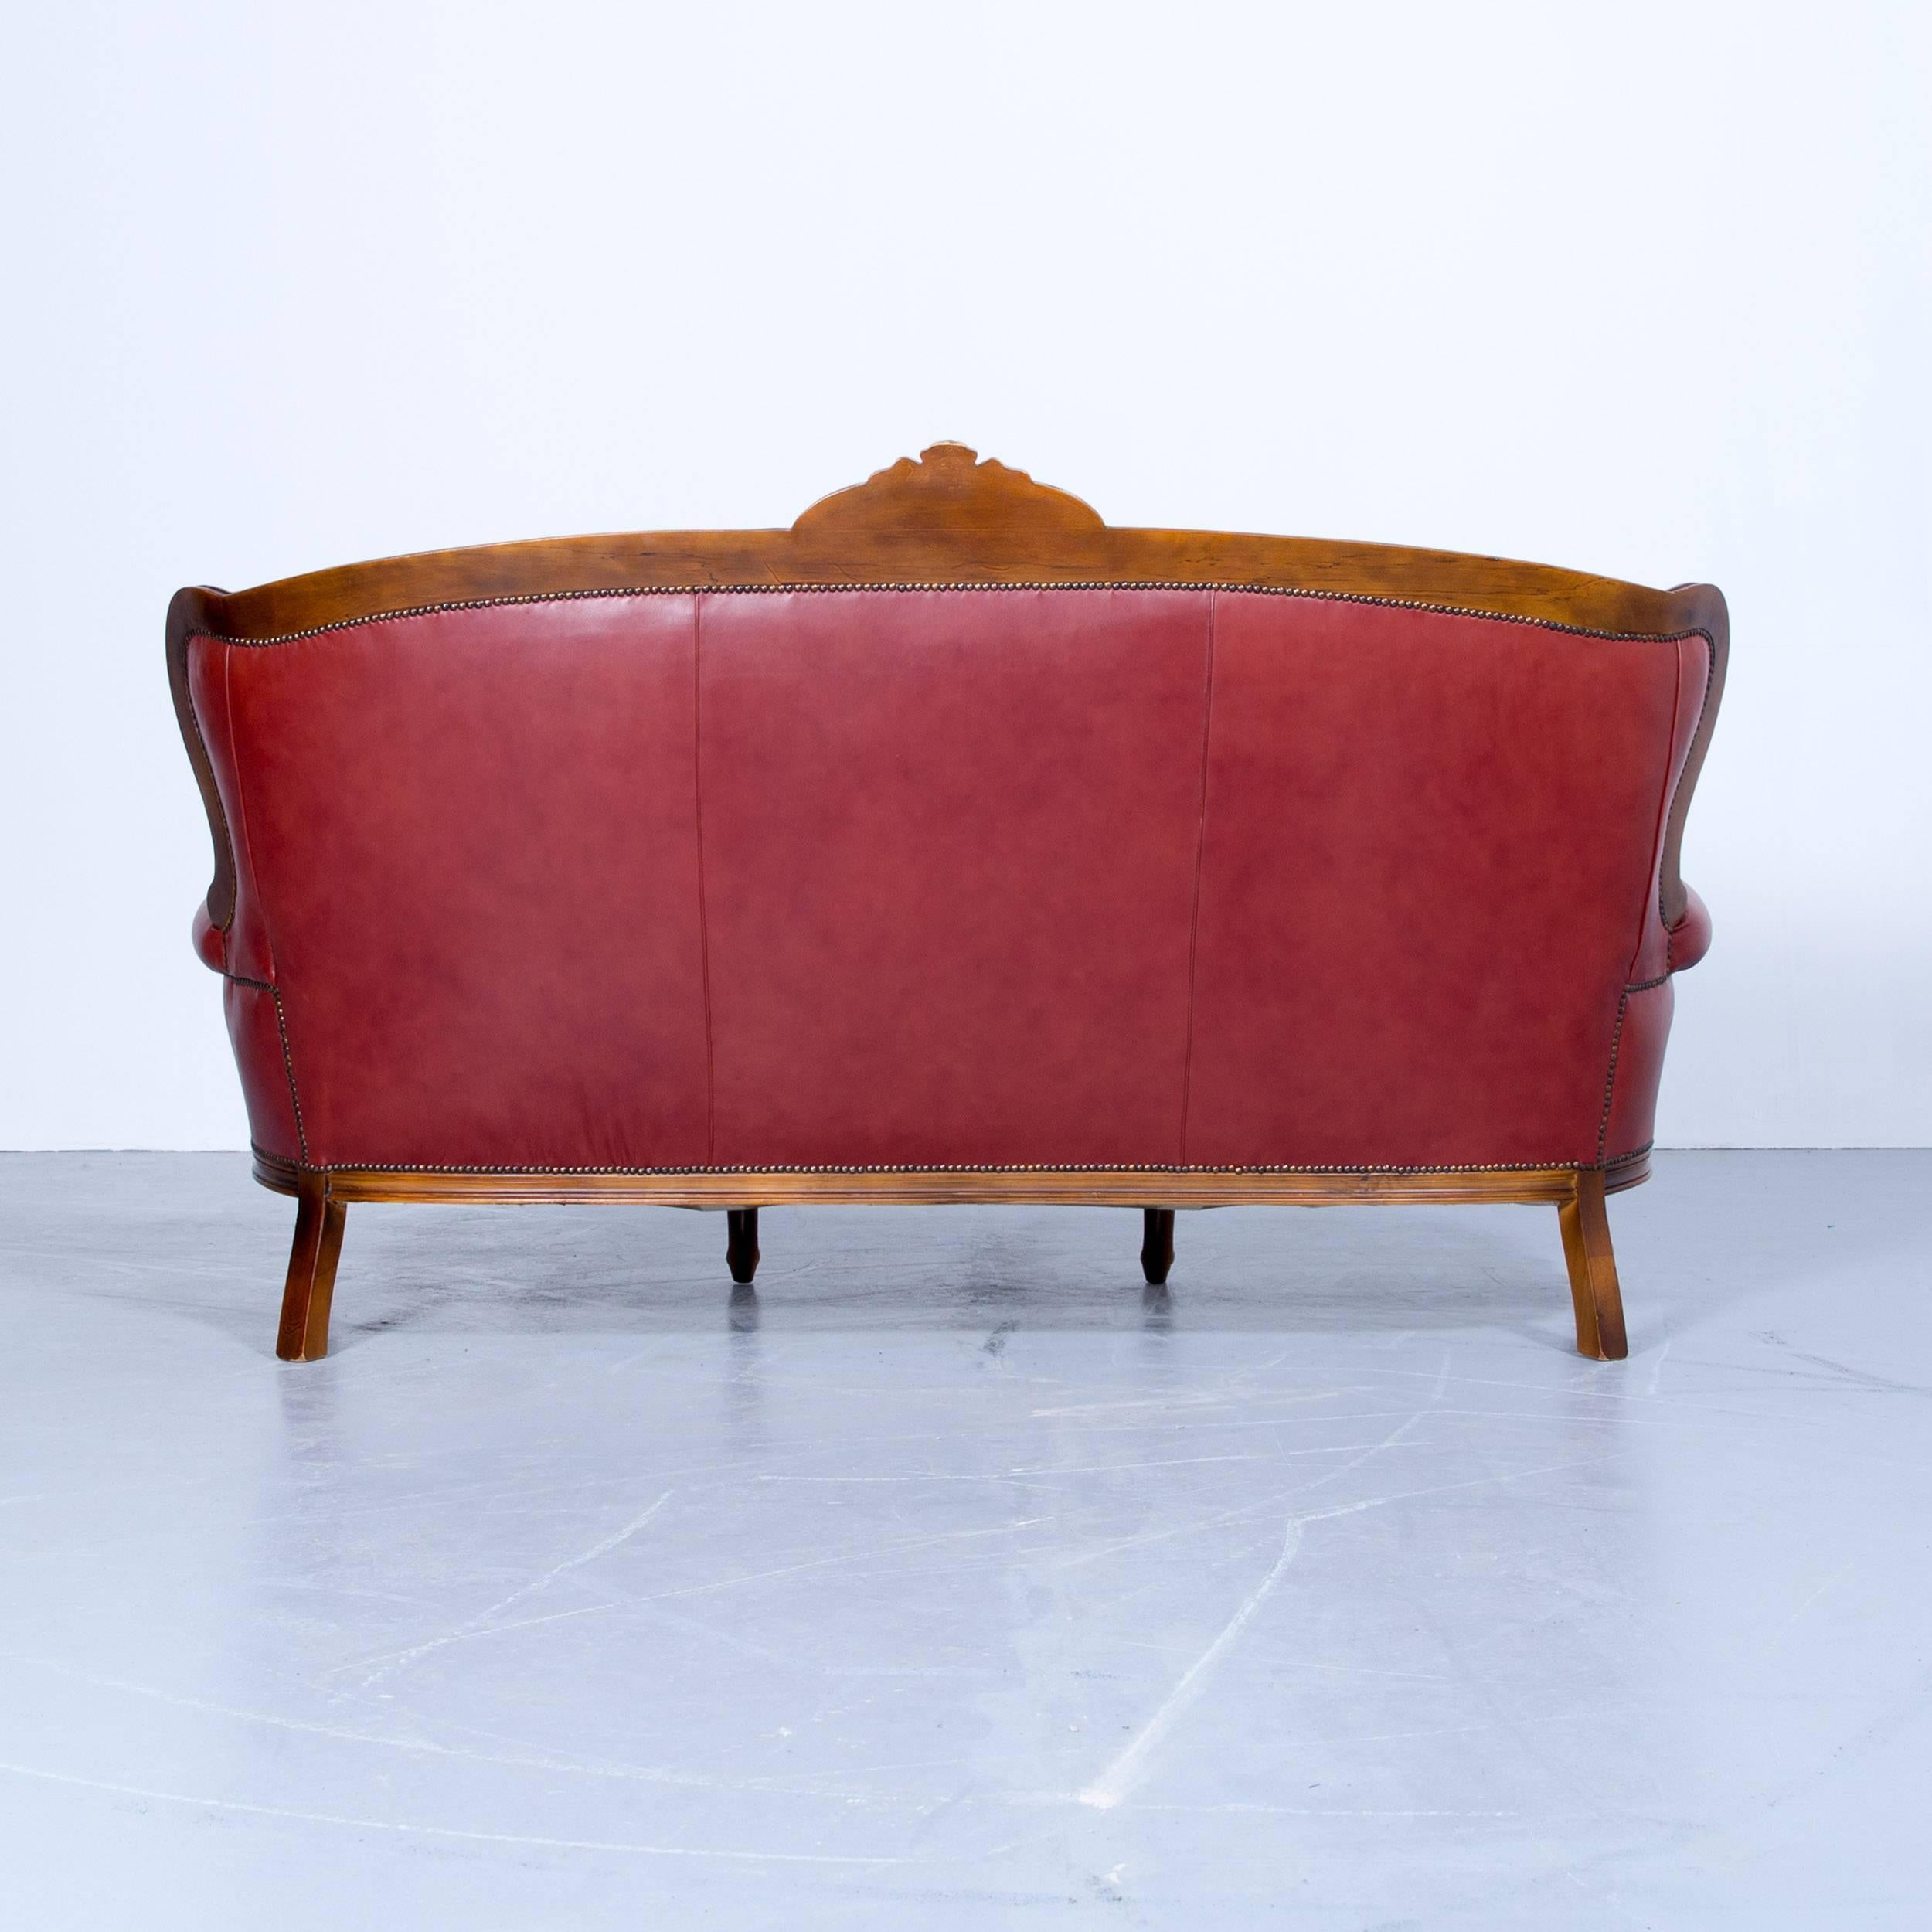 20th Century Barock Chesterfield Sofa Red Brown Leather Three-Seat Couch Vintage Rivets For Sale